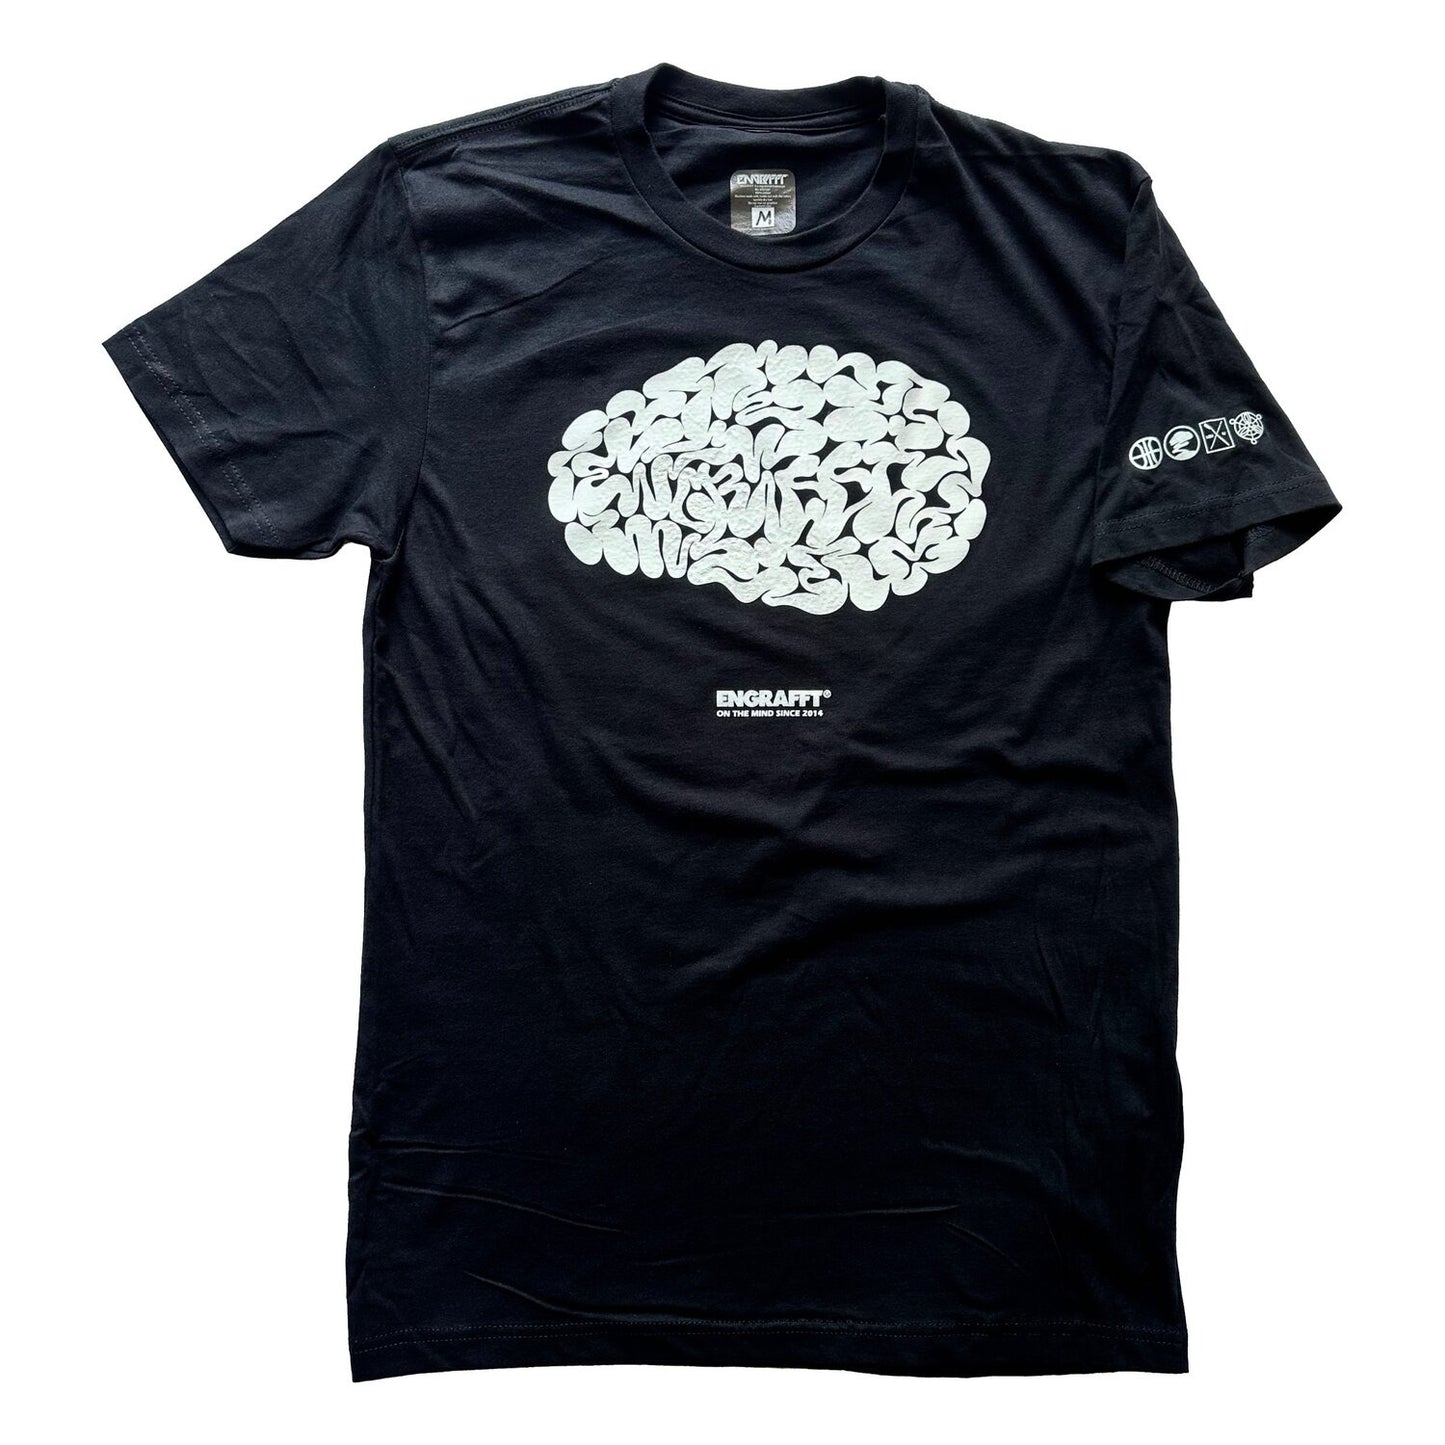 ENGRAFFT - The On The Mind Tee